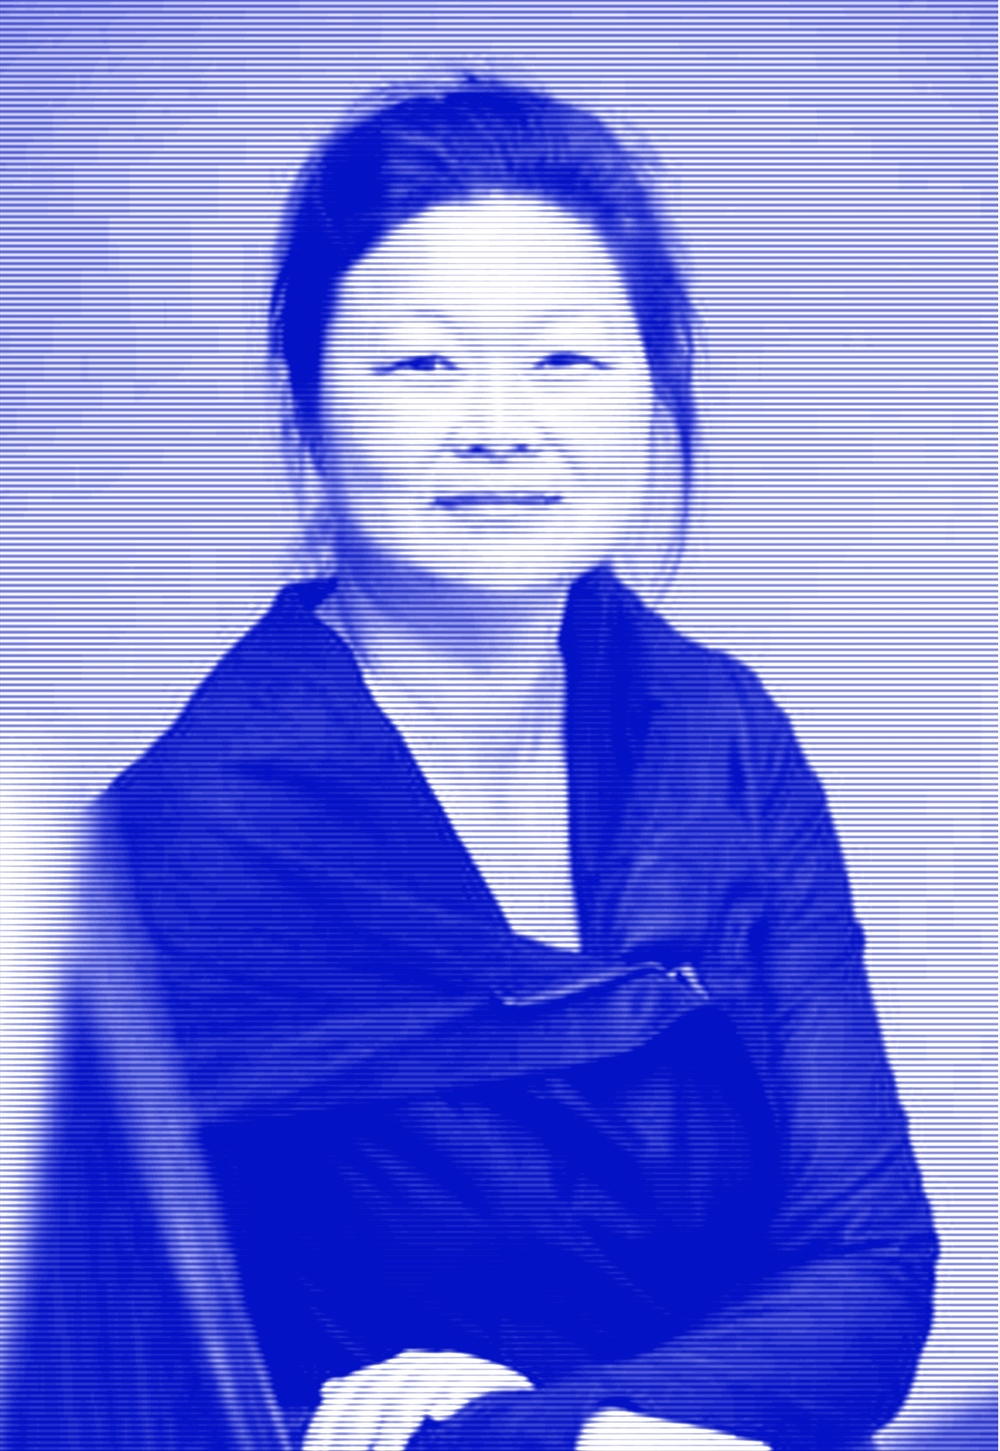 Archisearch INTERVIEW WITH J. MEEJIN YOON, PROFESSOR AND HEAD OF MIT DEPARTMENT OF ARCHITECTURE